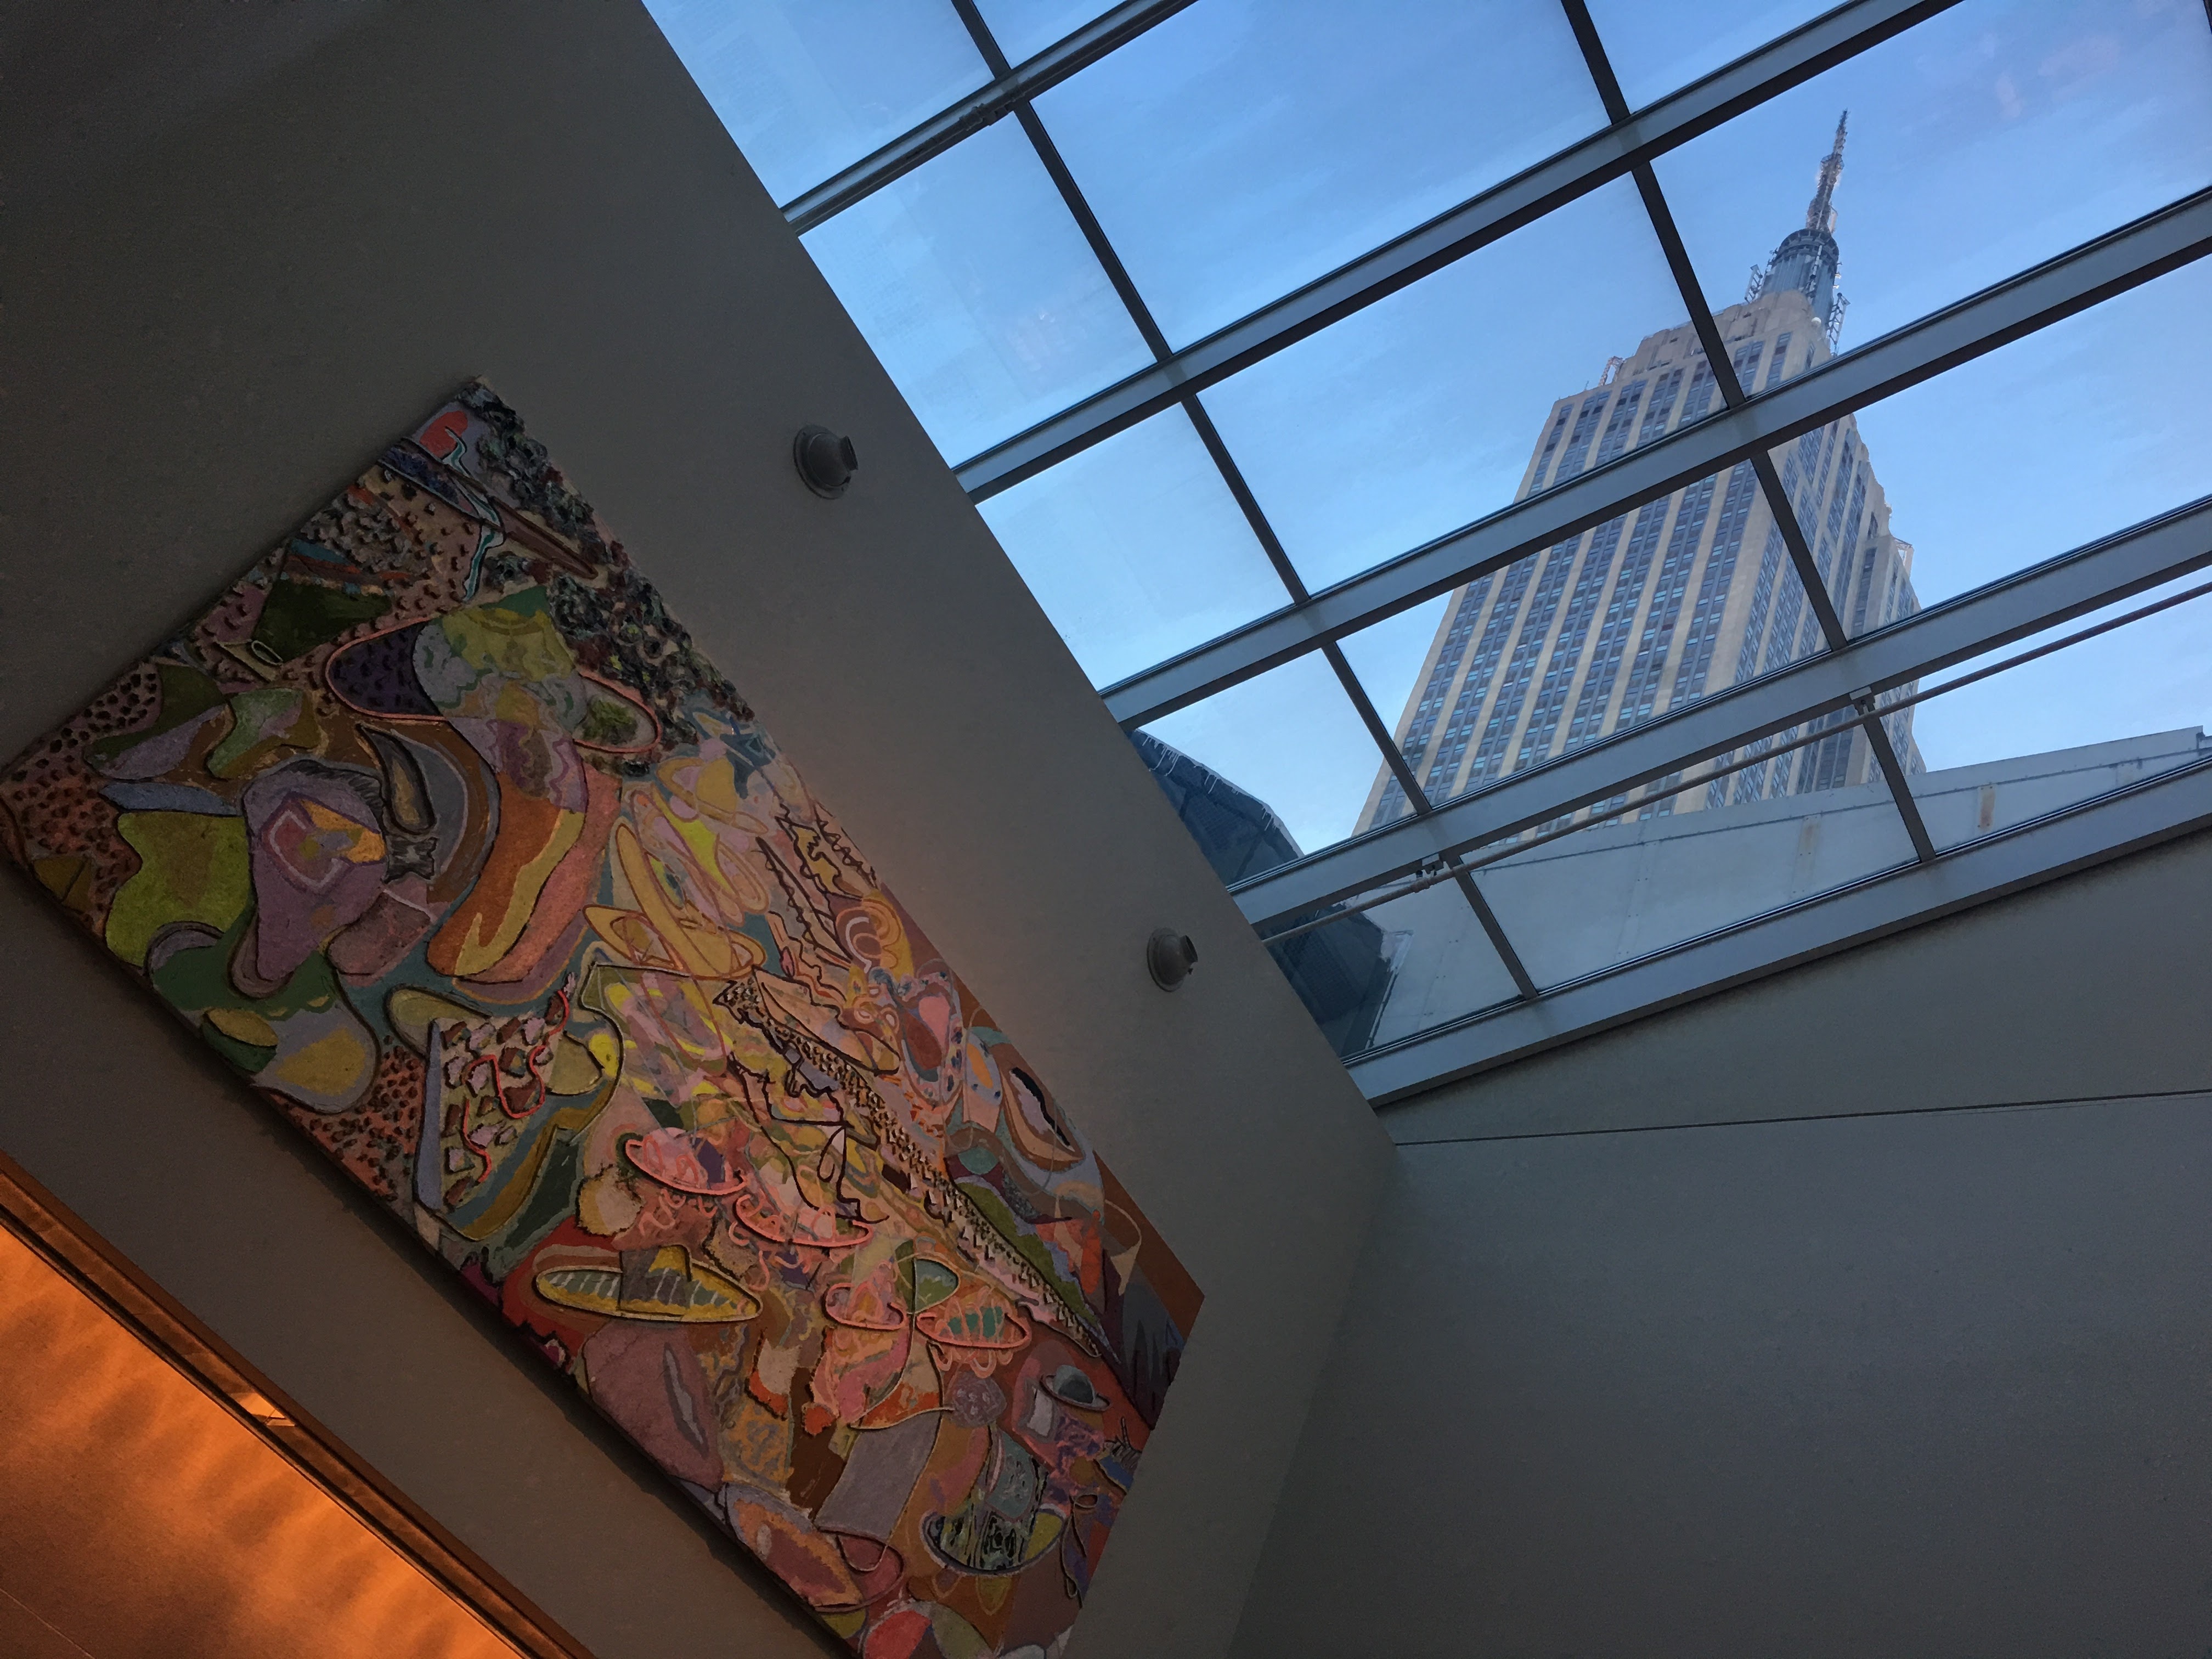 Photograph of the Empire State Building taken from the perspective of the Skylight Room.